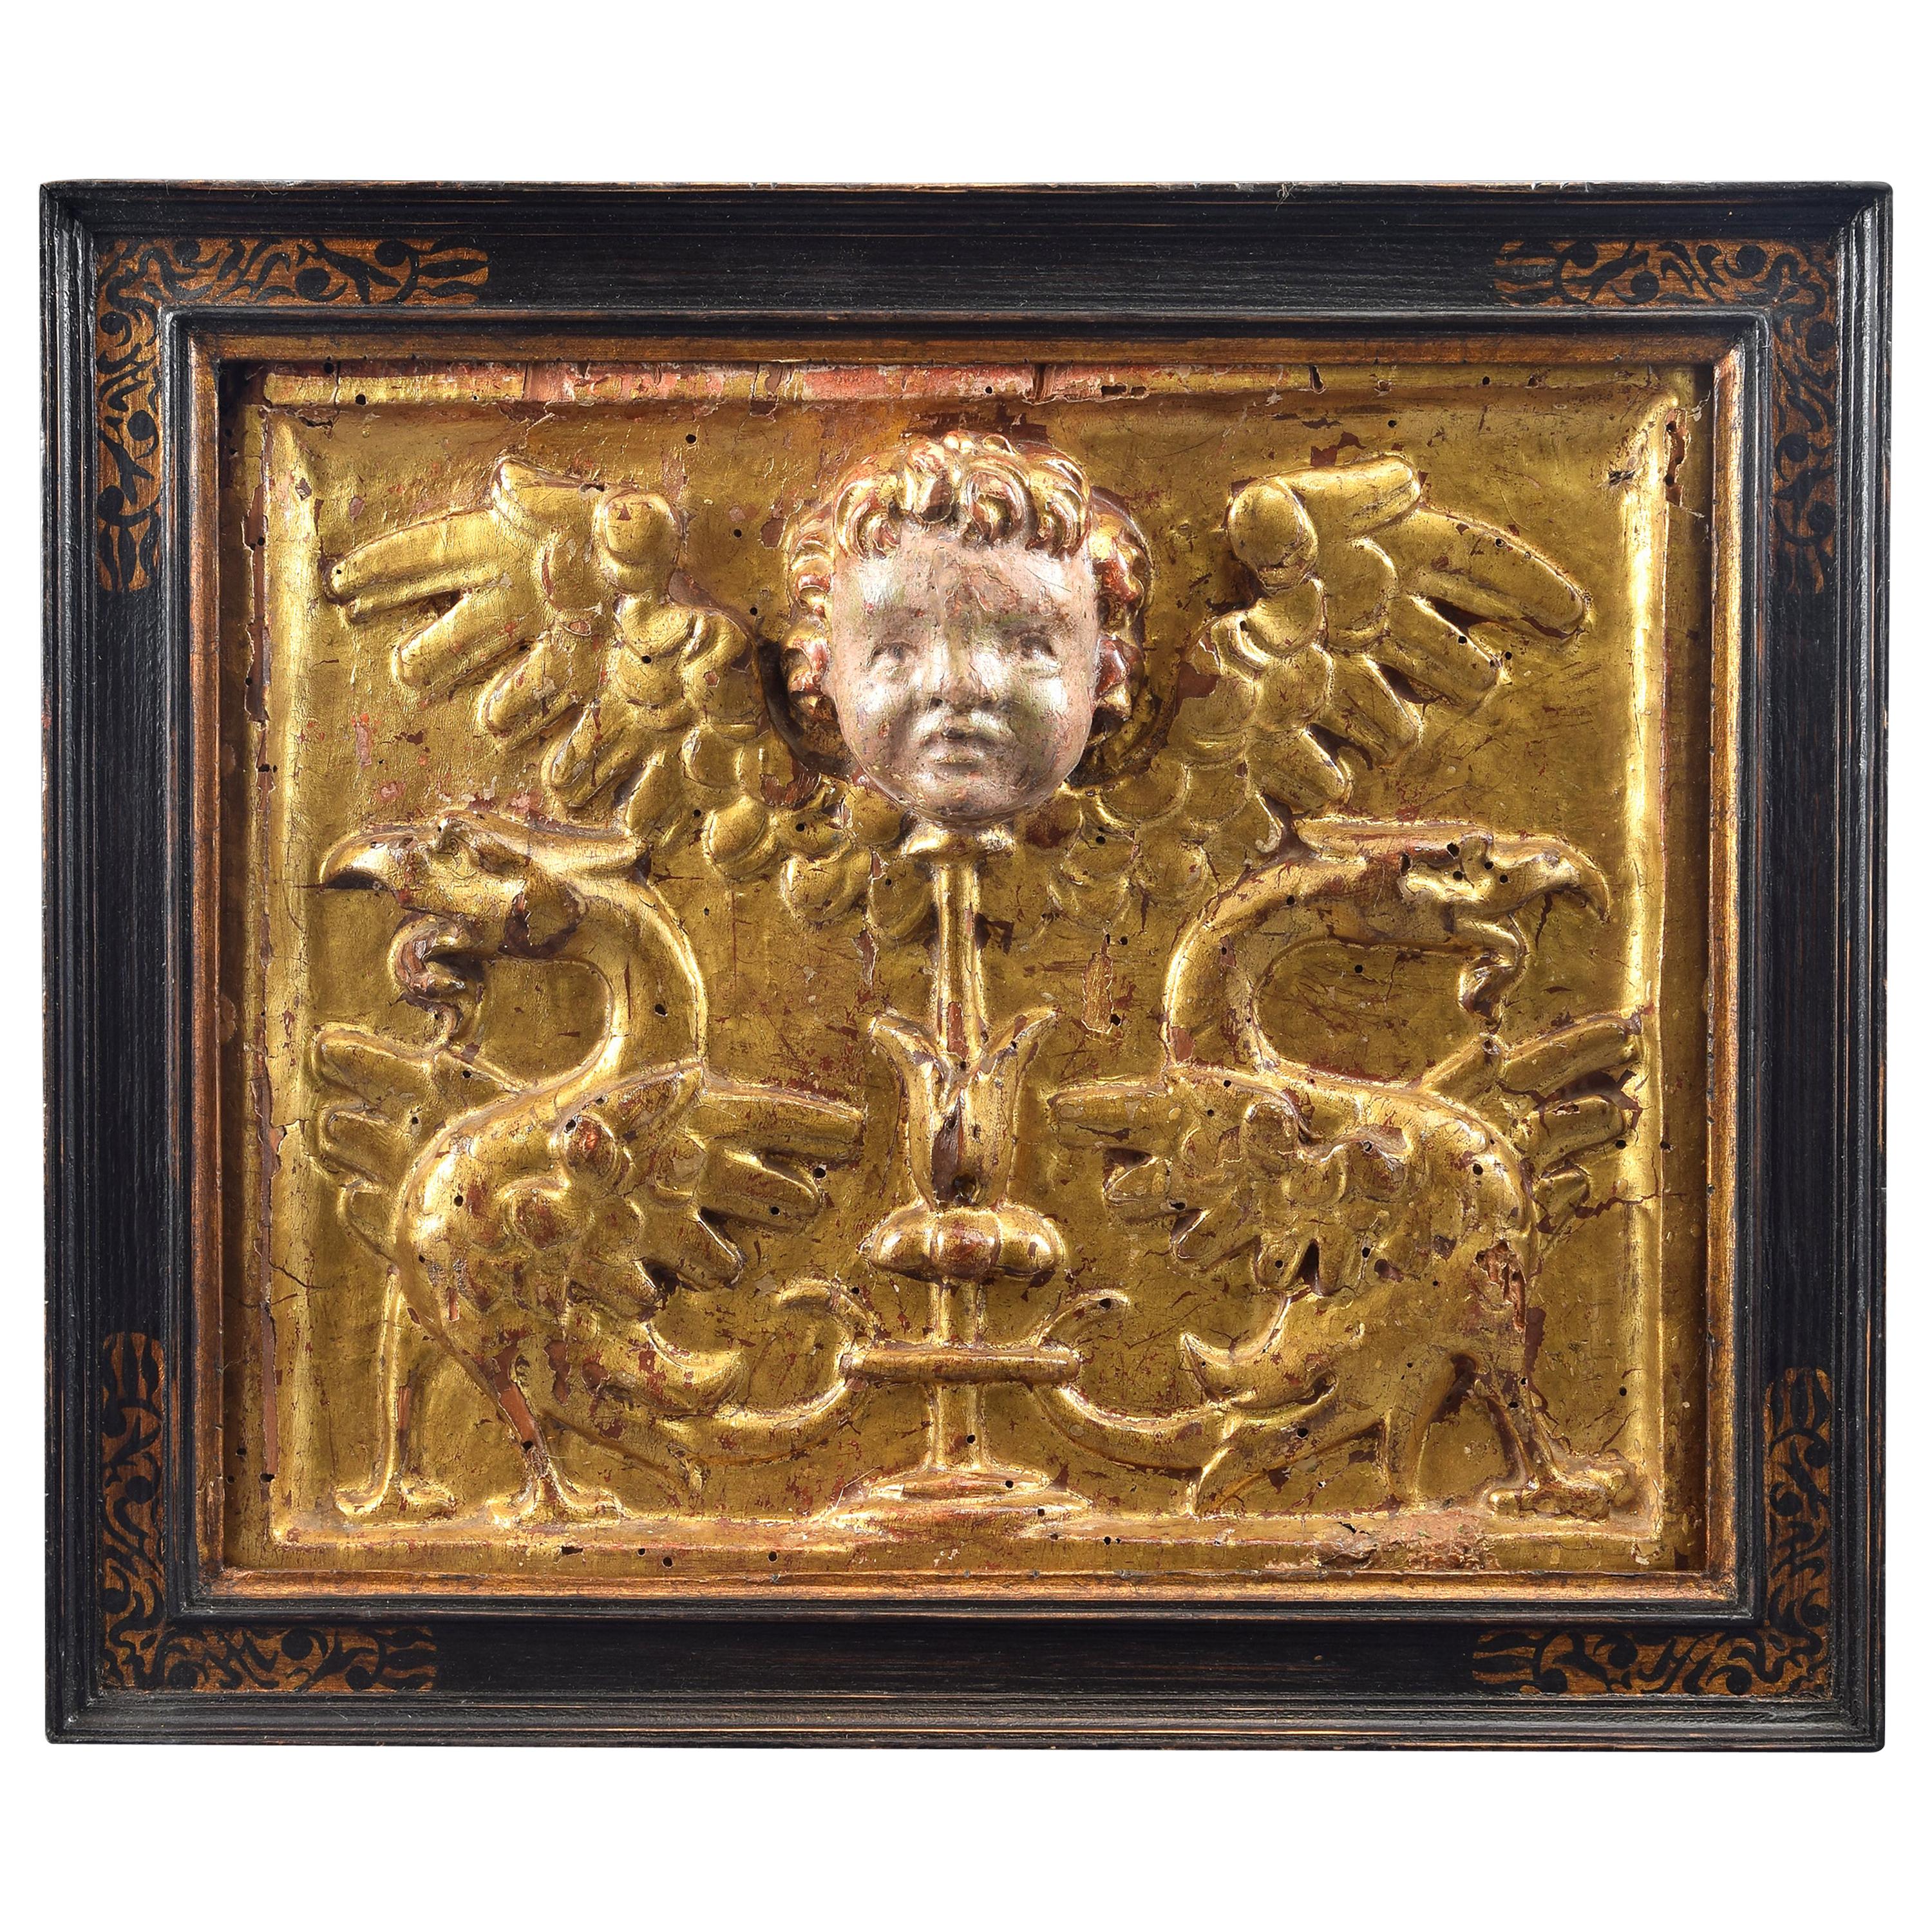 Relief, Grotesque or Candelieri, Wood, 16th Century